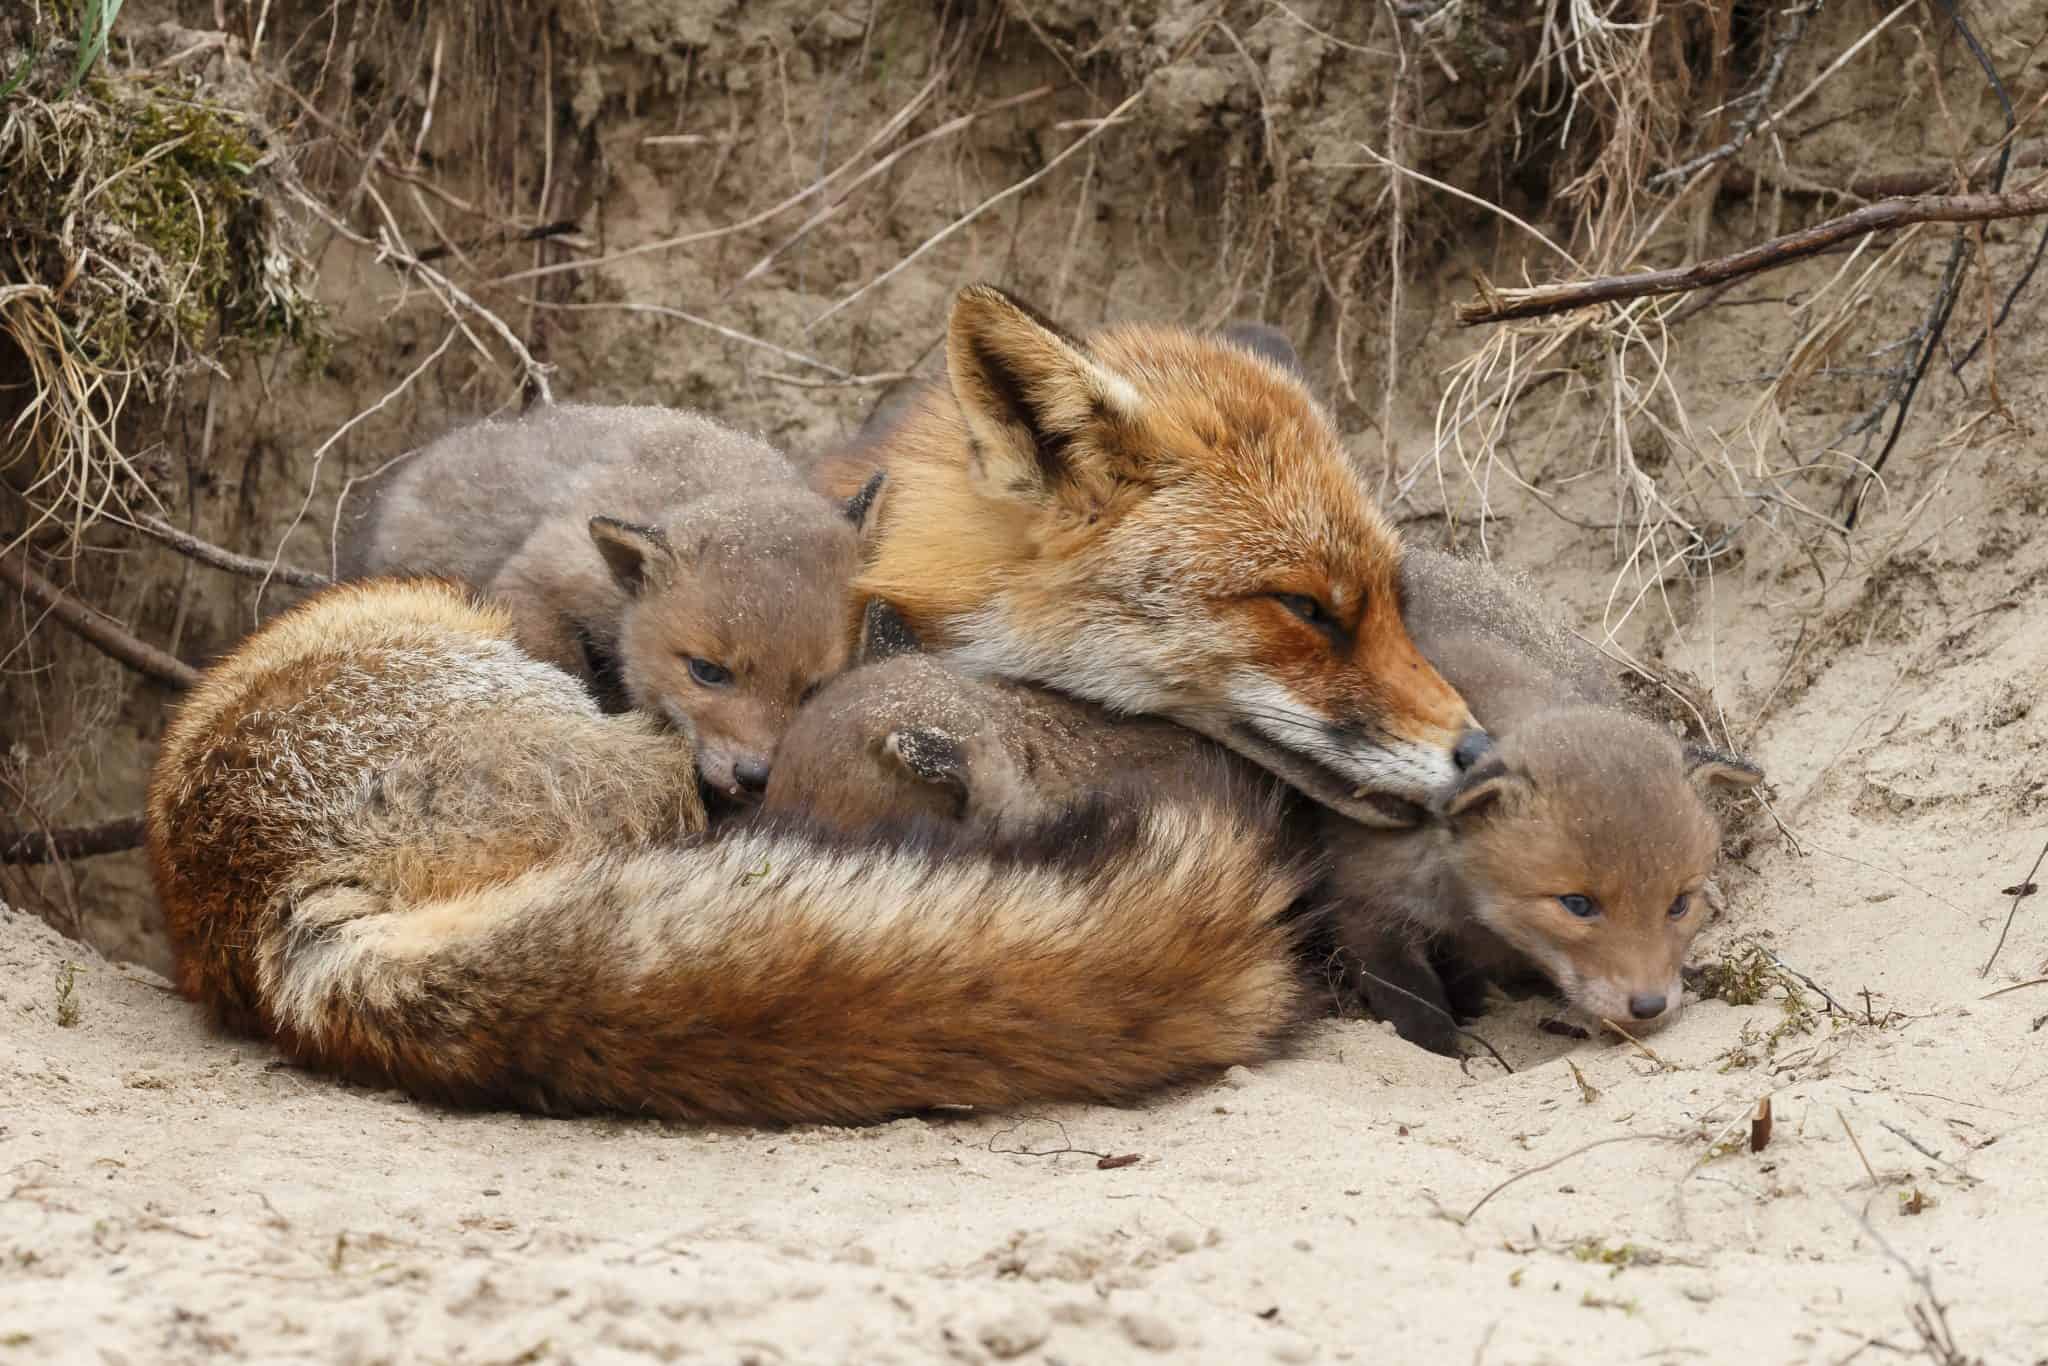 Petition: Ban Fox and Coyote Penning in All 50 States